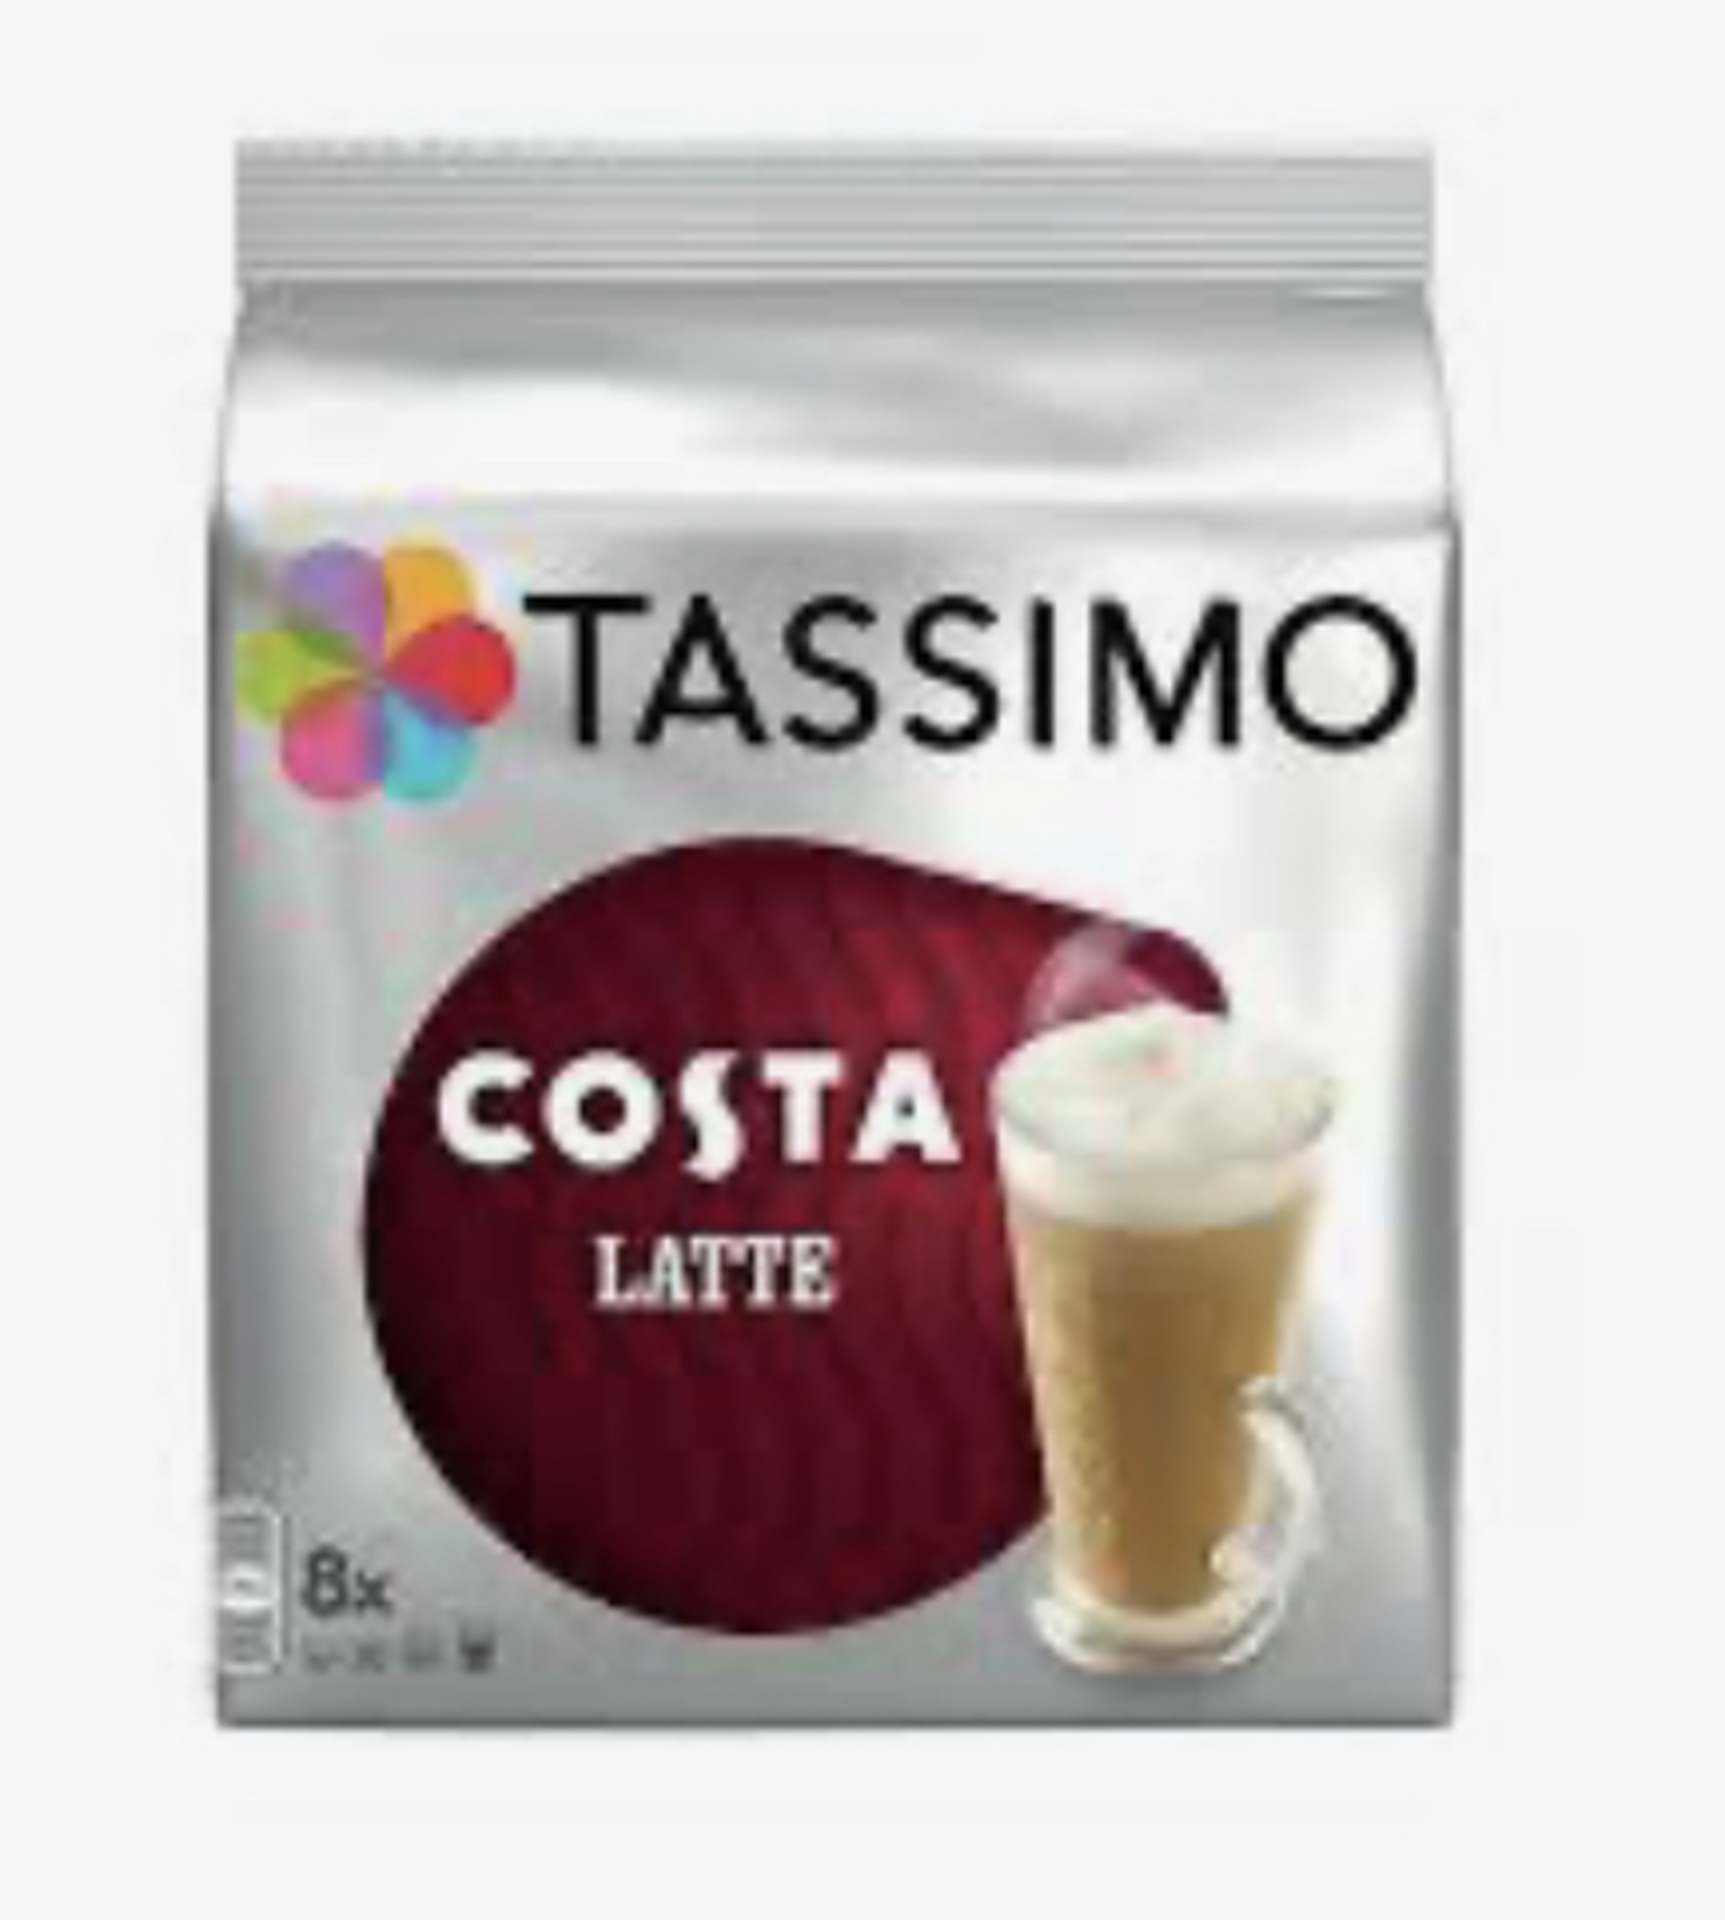 RRP £1501 (Approx. Count 89) Spig712C0Xf Tassimo Costa Latte Coffee Pods 16 Discs, 8 Servings (